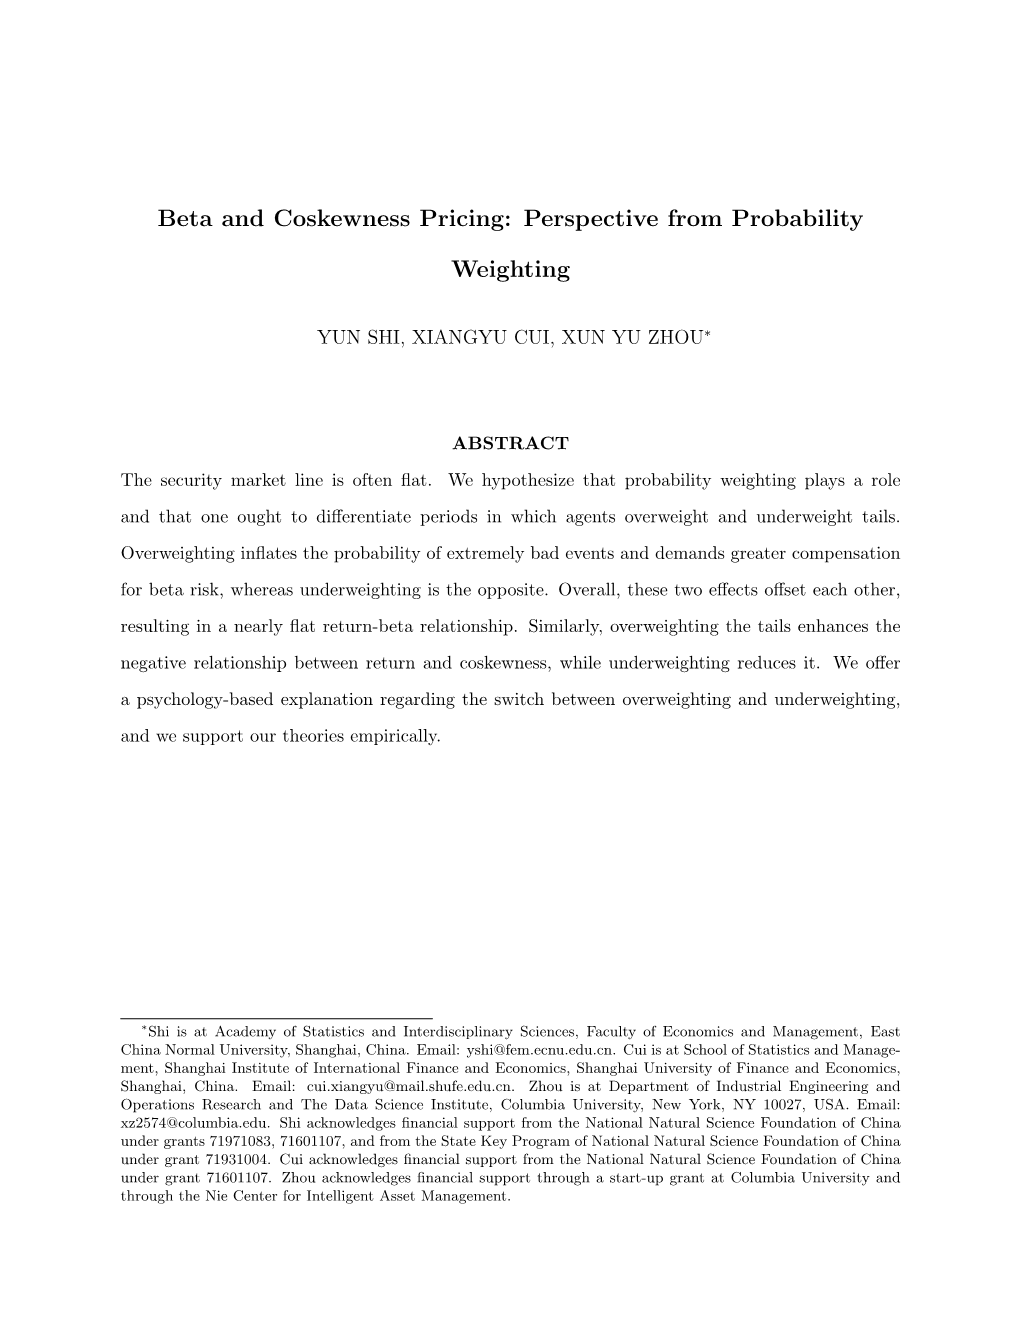 Beta and Coskewness Pricing: Perspective from Probability